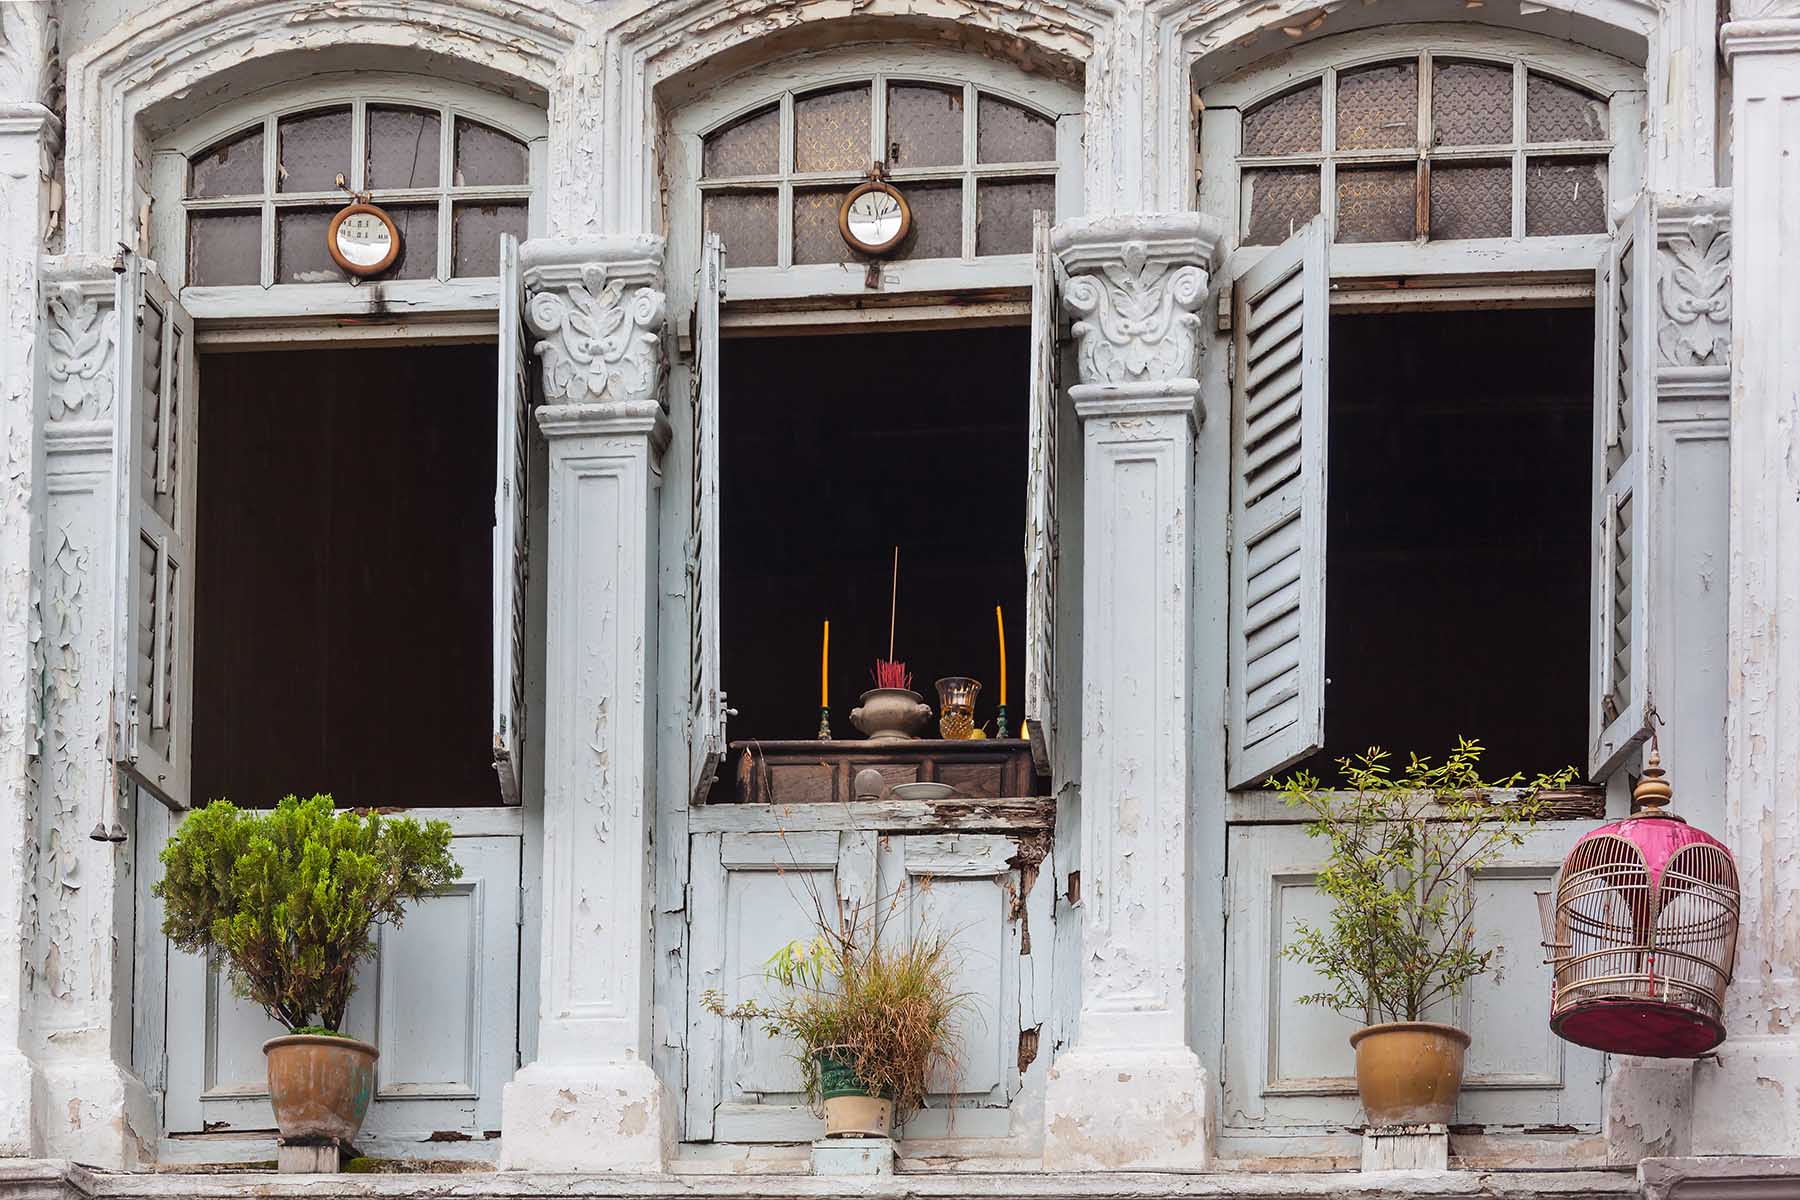 Closeup of an old colonial building facade in historic Little India, Singapore. There are a couple of plants on the ledge and a birdcage is hanging from the sill. The building needs upkeep.